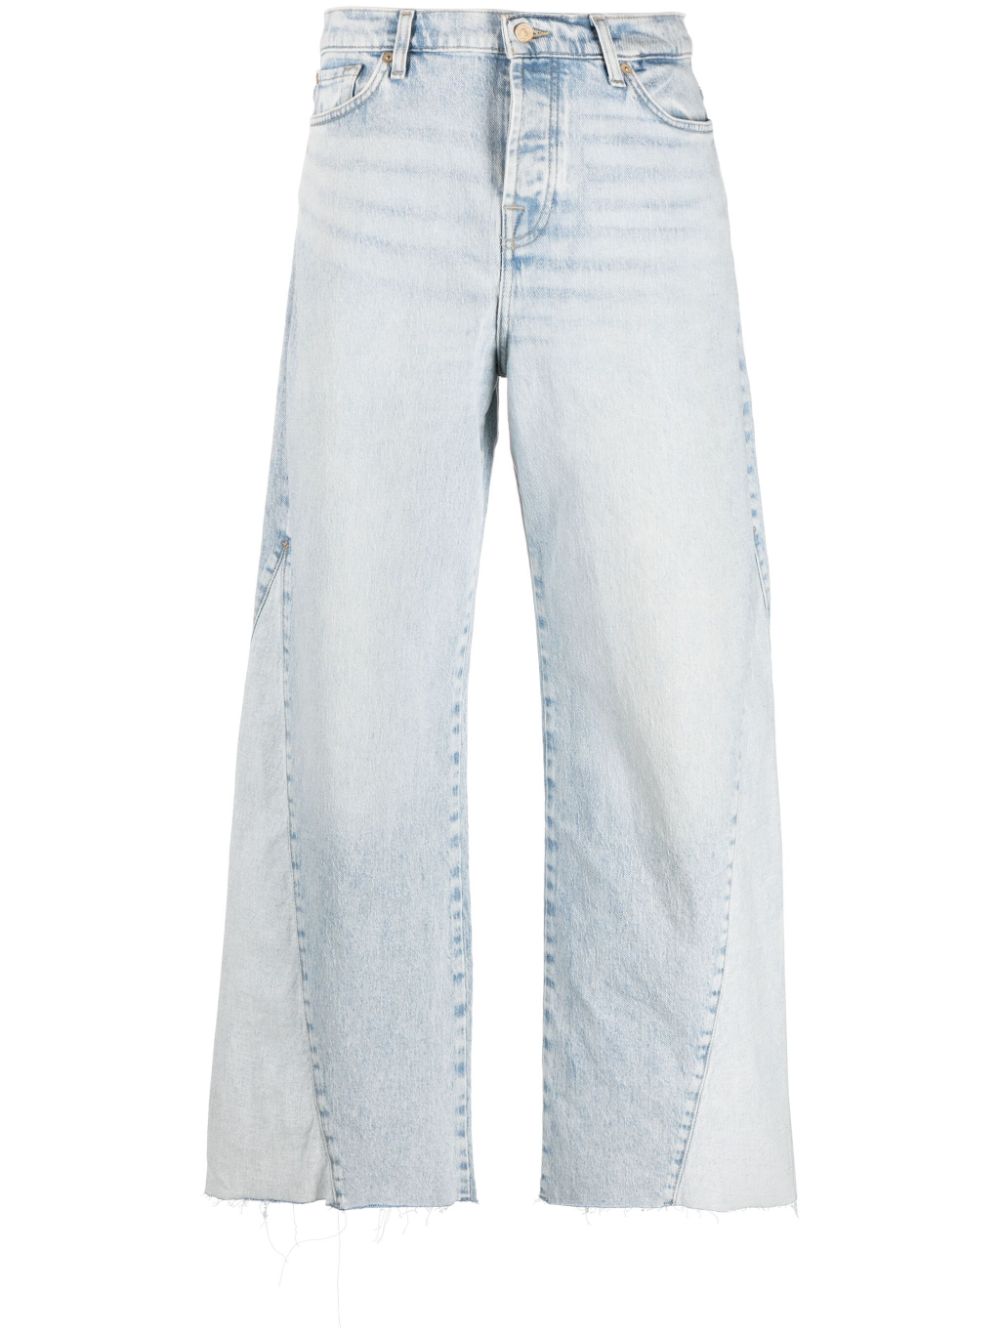 7 For All Mankind Zoey wide-leg jeans - Blue von 7 For All Mankind